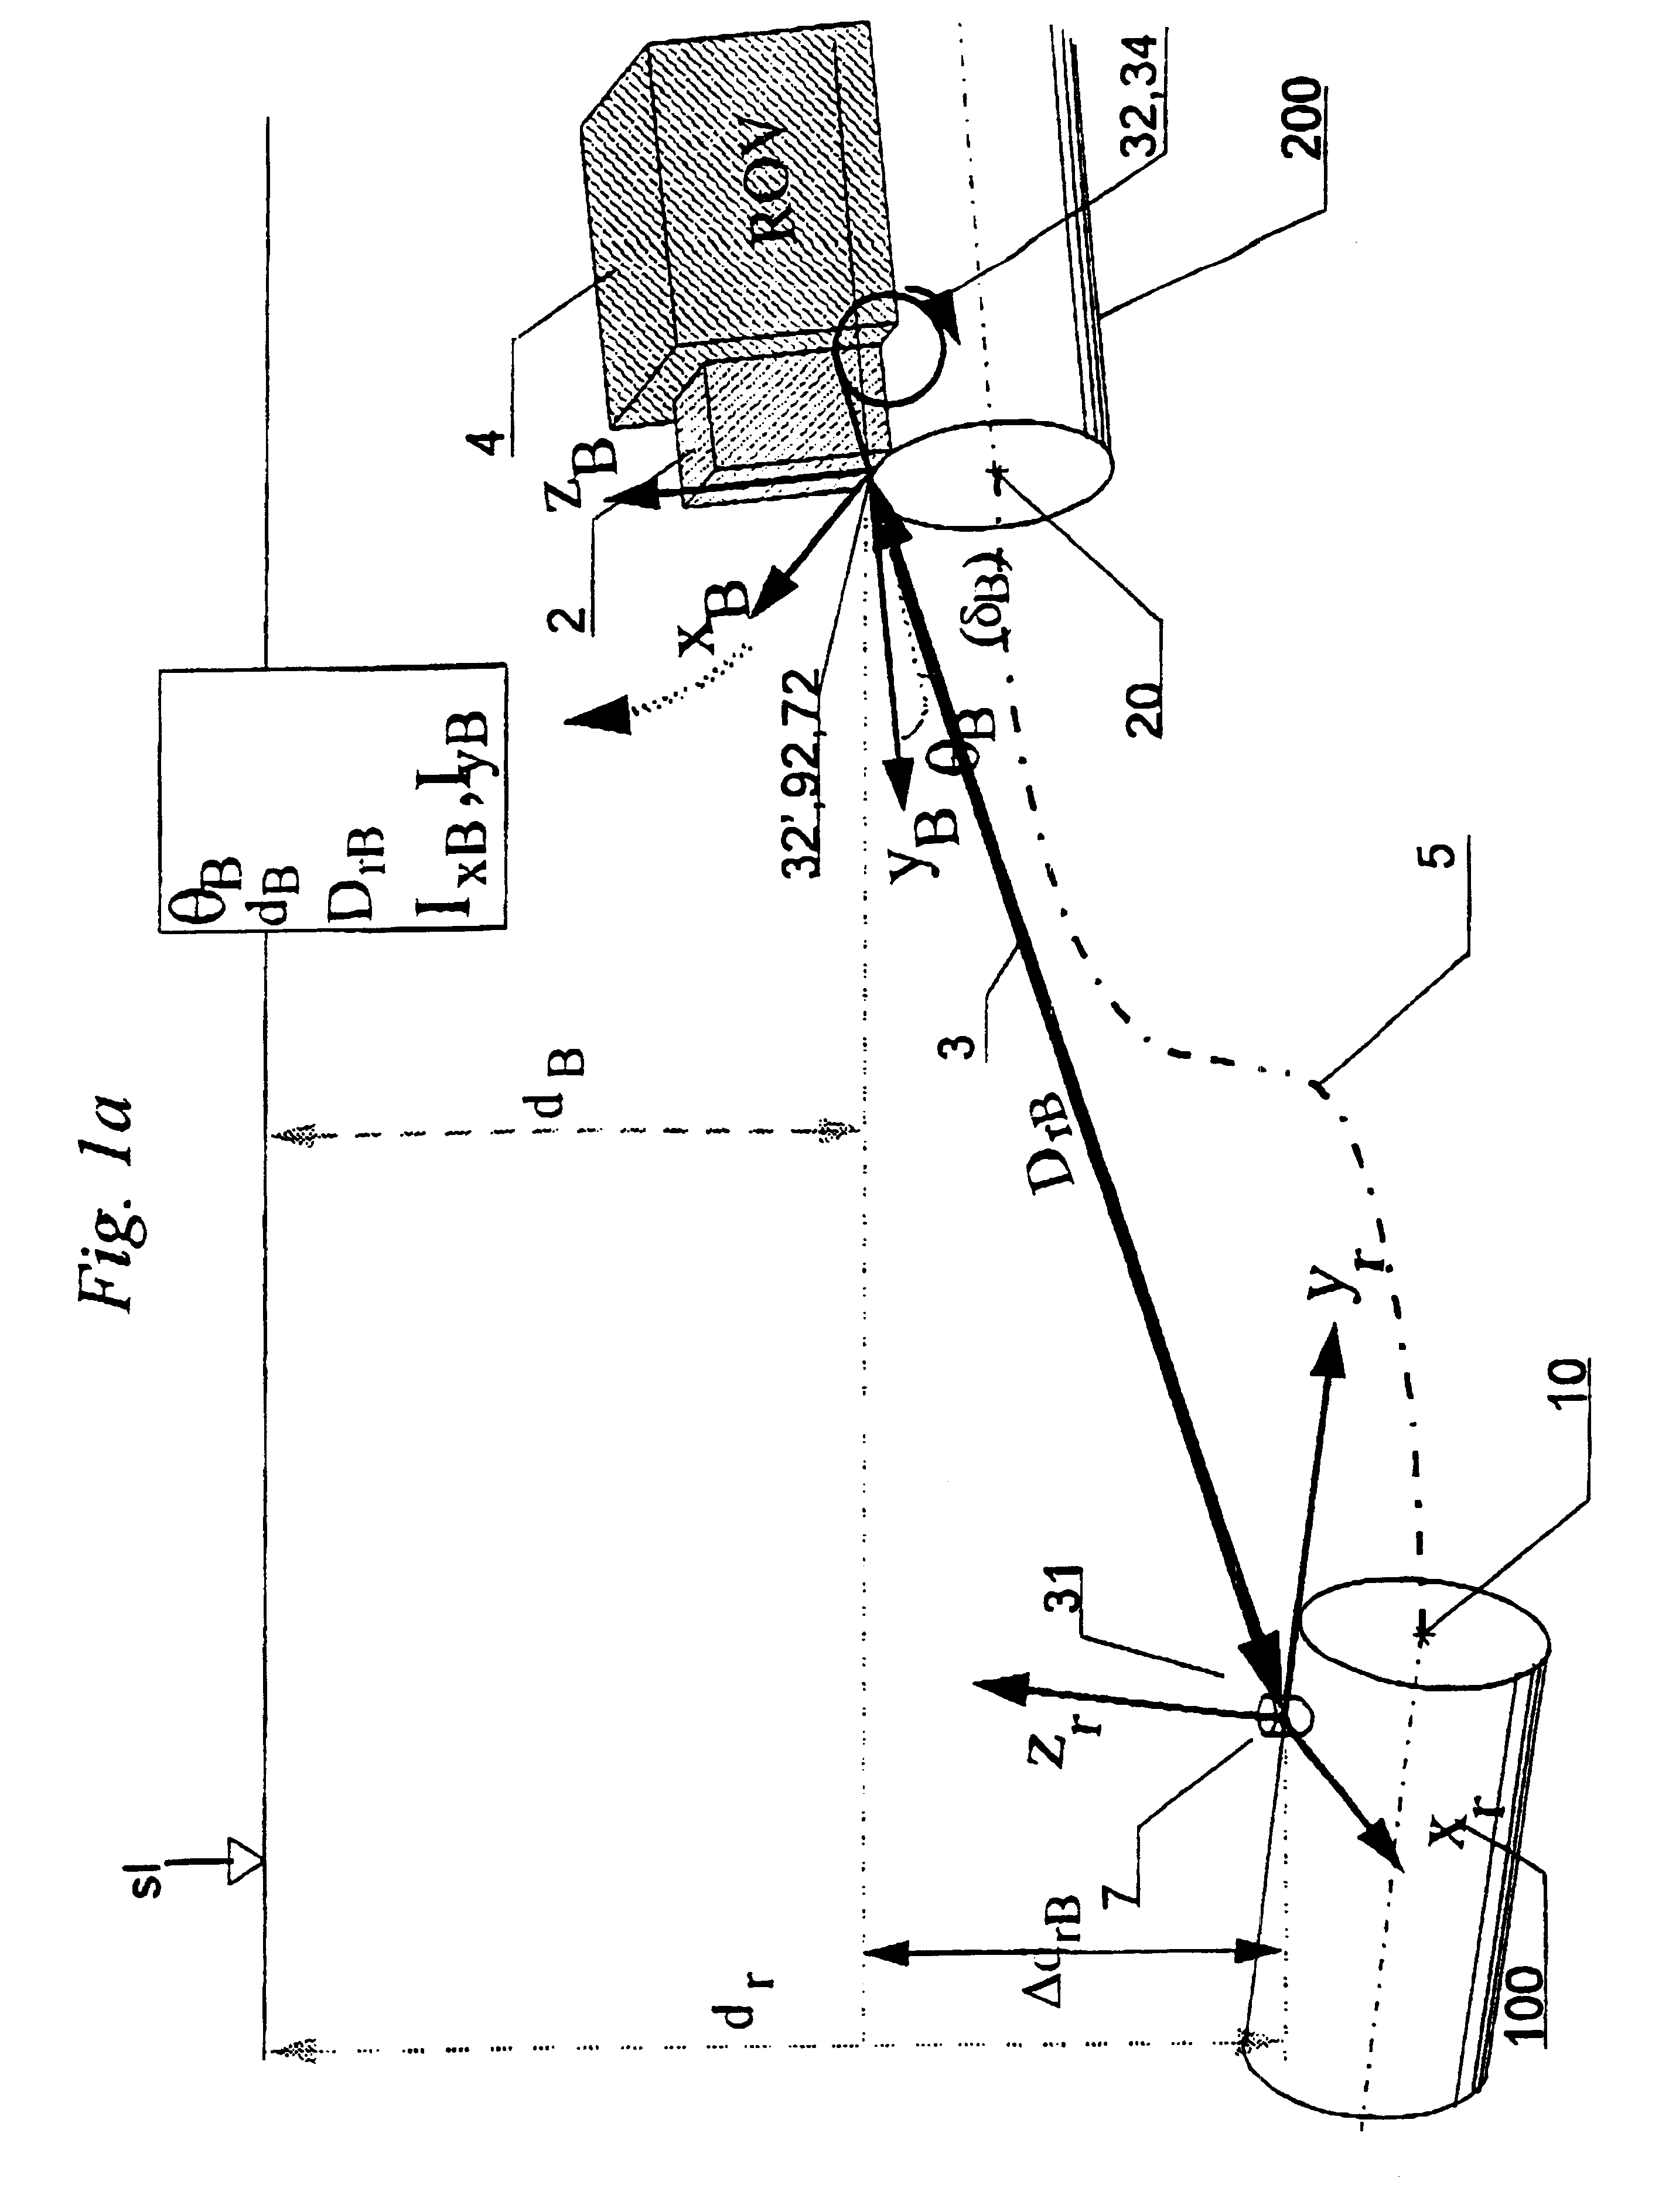 System for subsea diverless metrology and hard-pipe connection of pipelines